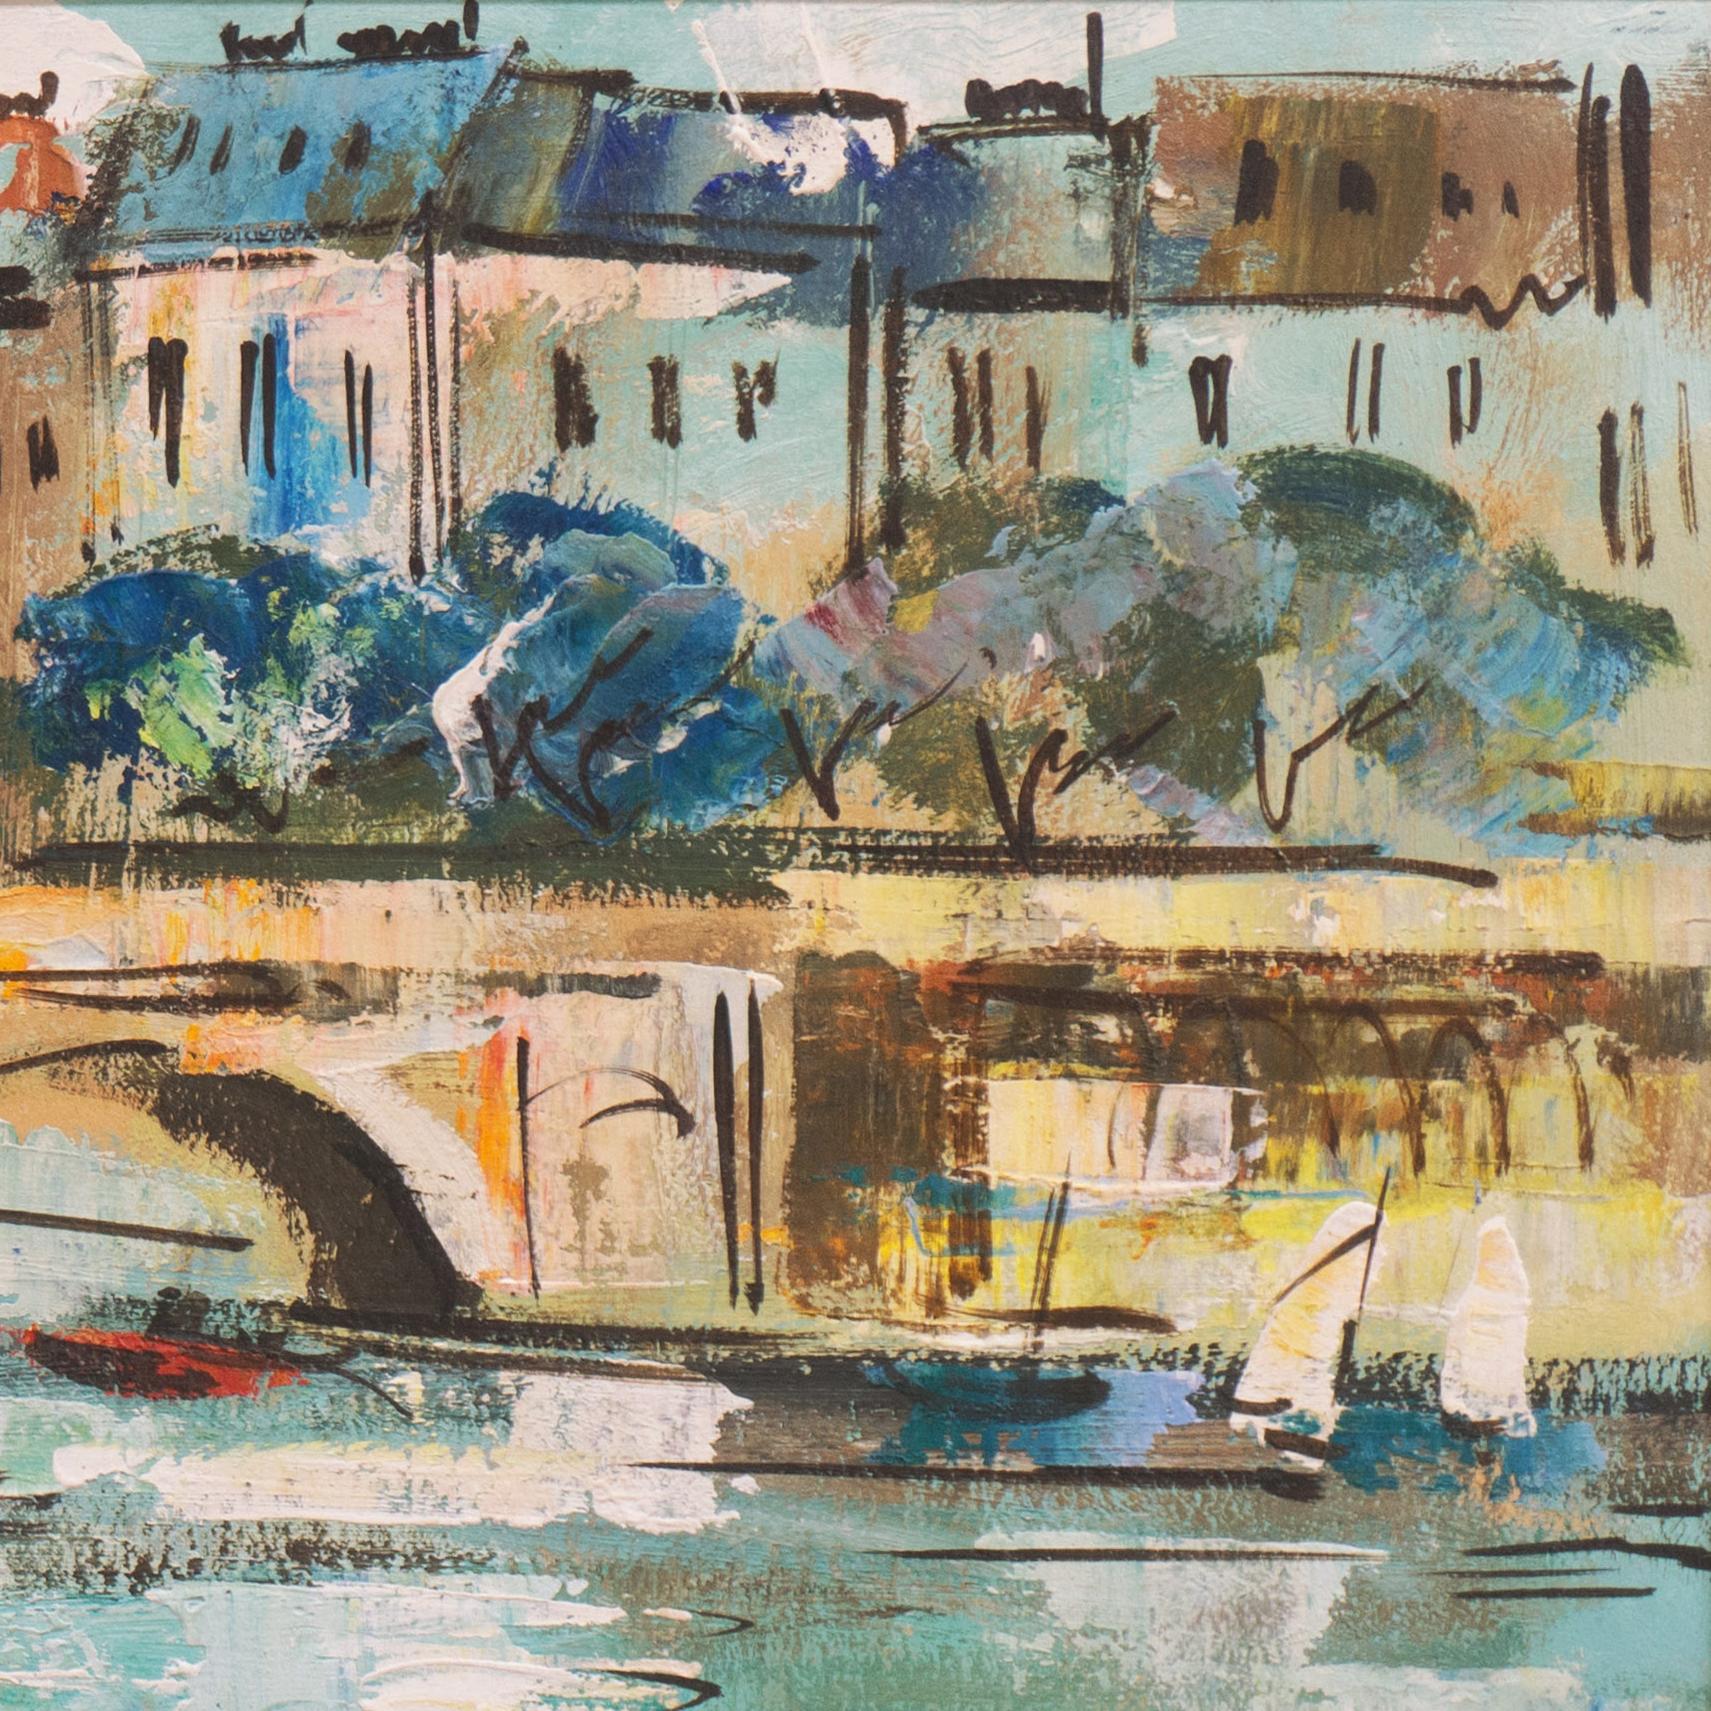 Signed lower right, 'Bardot' (French, 20th century) and painted circa 1985.
Framed dimensions: 15 H x 33.25 W x 2 D inches.

A panoramic view of the Seine with figures overlooking the balustrade, a sailing boat on the river and a view of buildings